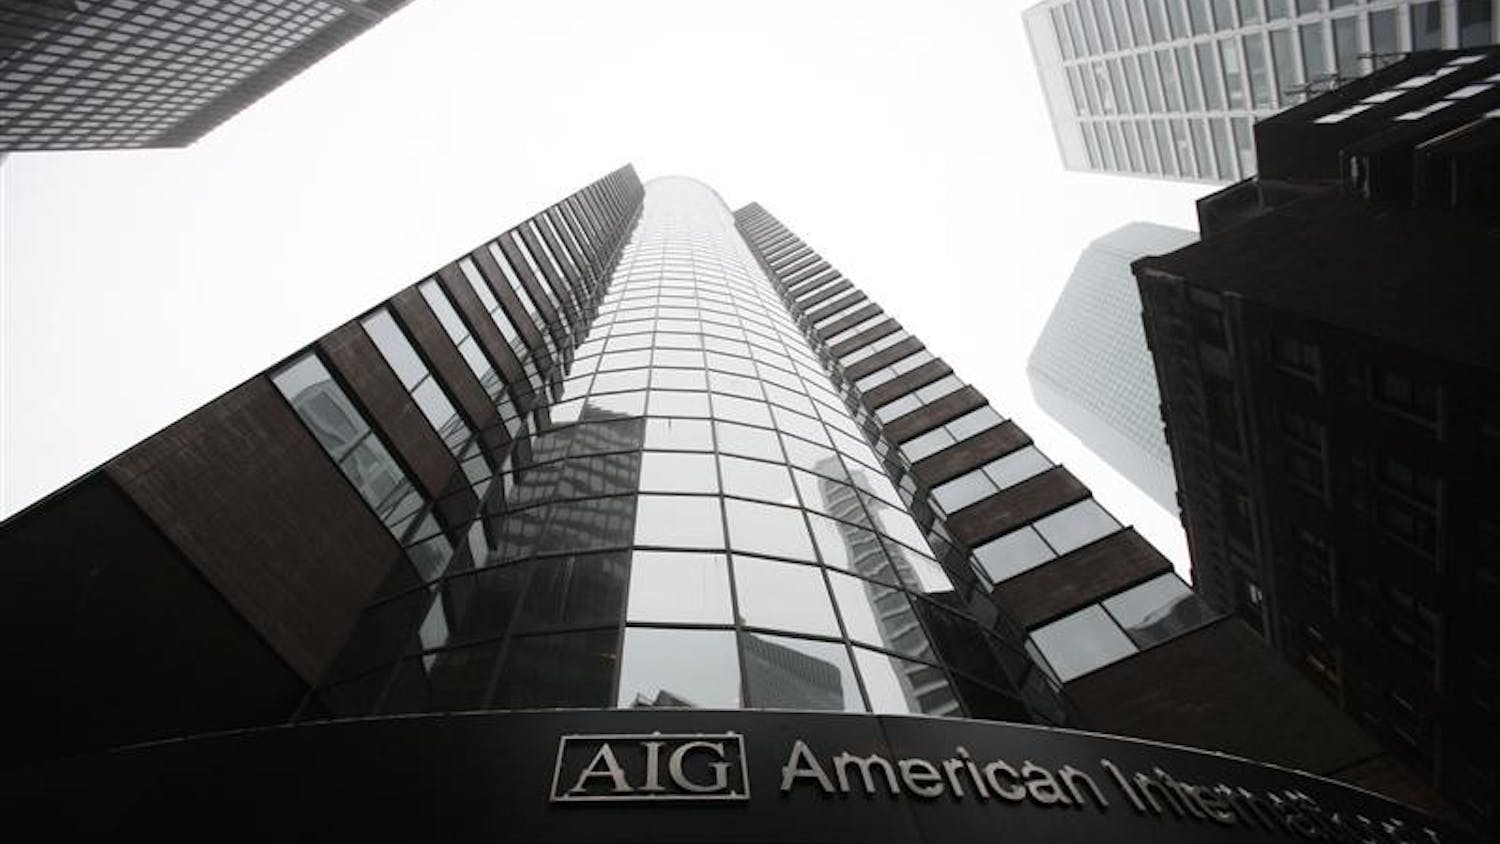 AIG offices in New York are shown on March 2. American International Group Inc., once the world's largest insurer, said Monday it lost $61.7 billion in the fourth fourth, the biggest quarterly loss in U.S. corporate history, amid continued financial market turmoil. The results come as the U.S. government also Monday announced a restructuring of a bailout plan for the troubled insurer, extending $30 billion in additional aid to the company for a total bailout topping $170.